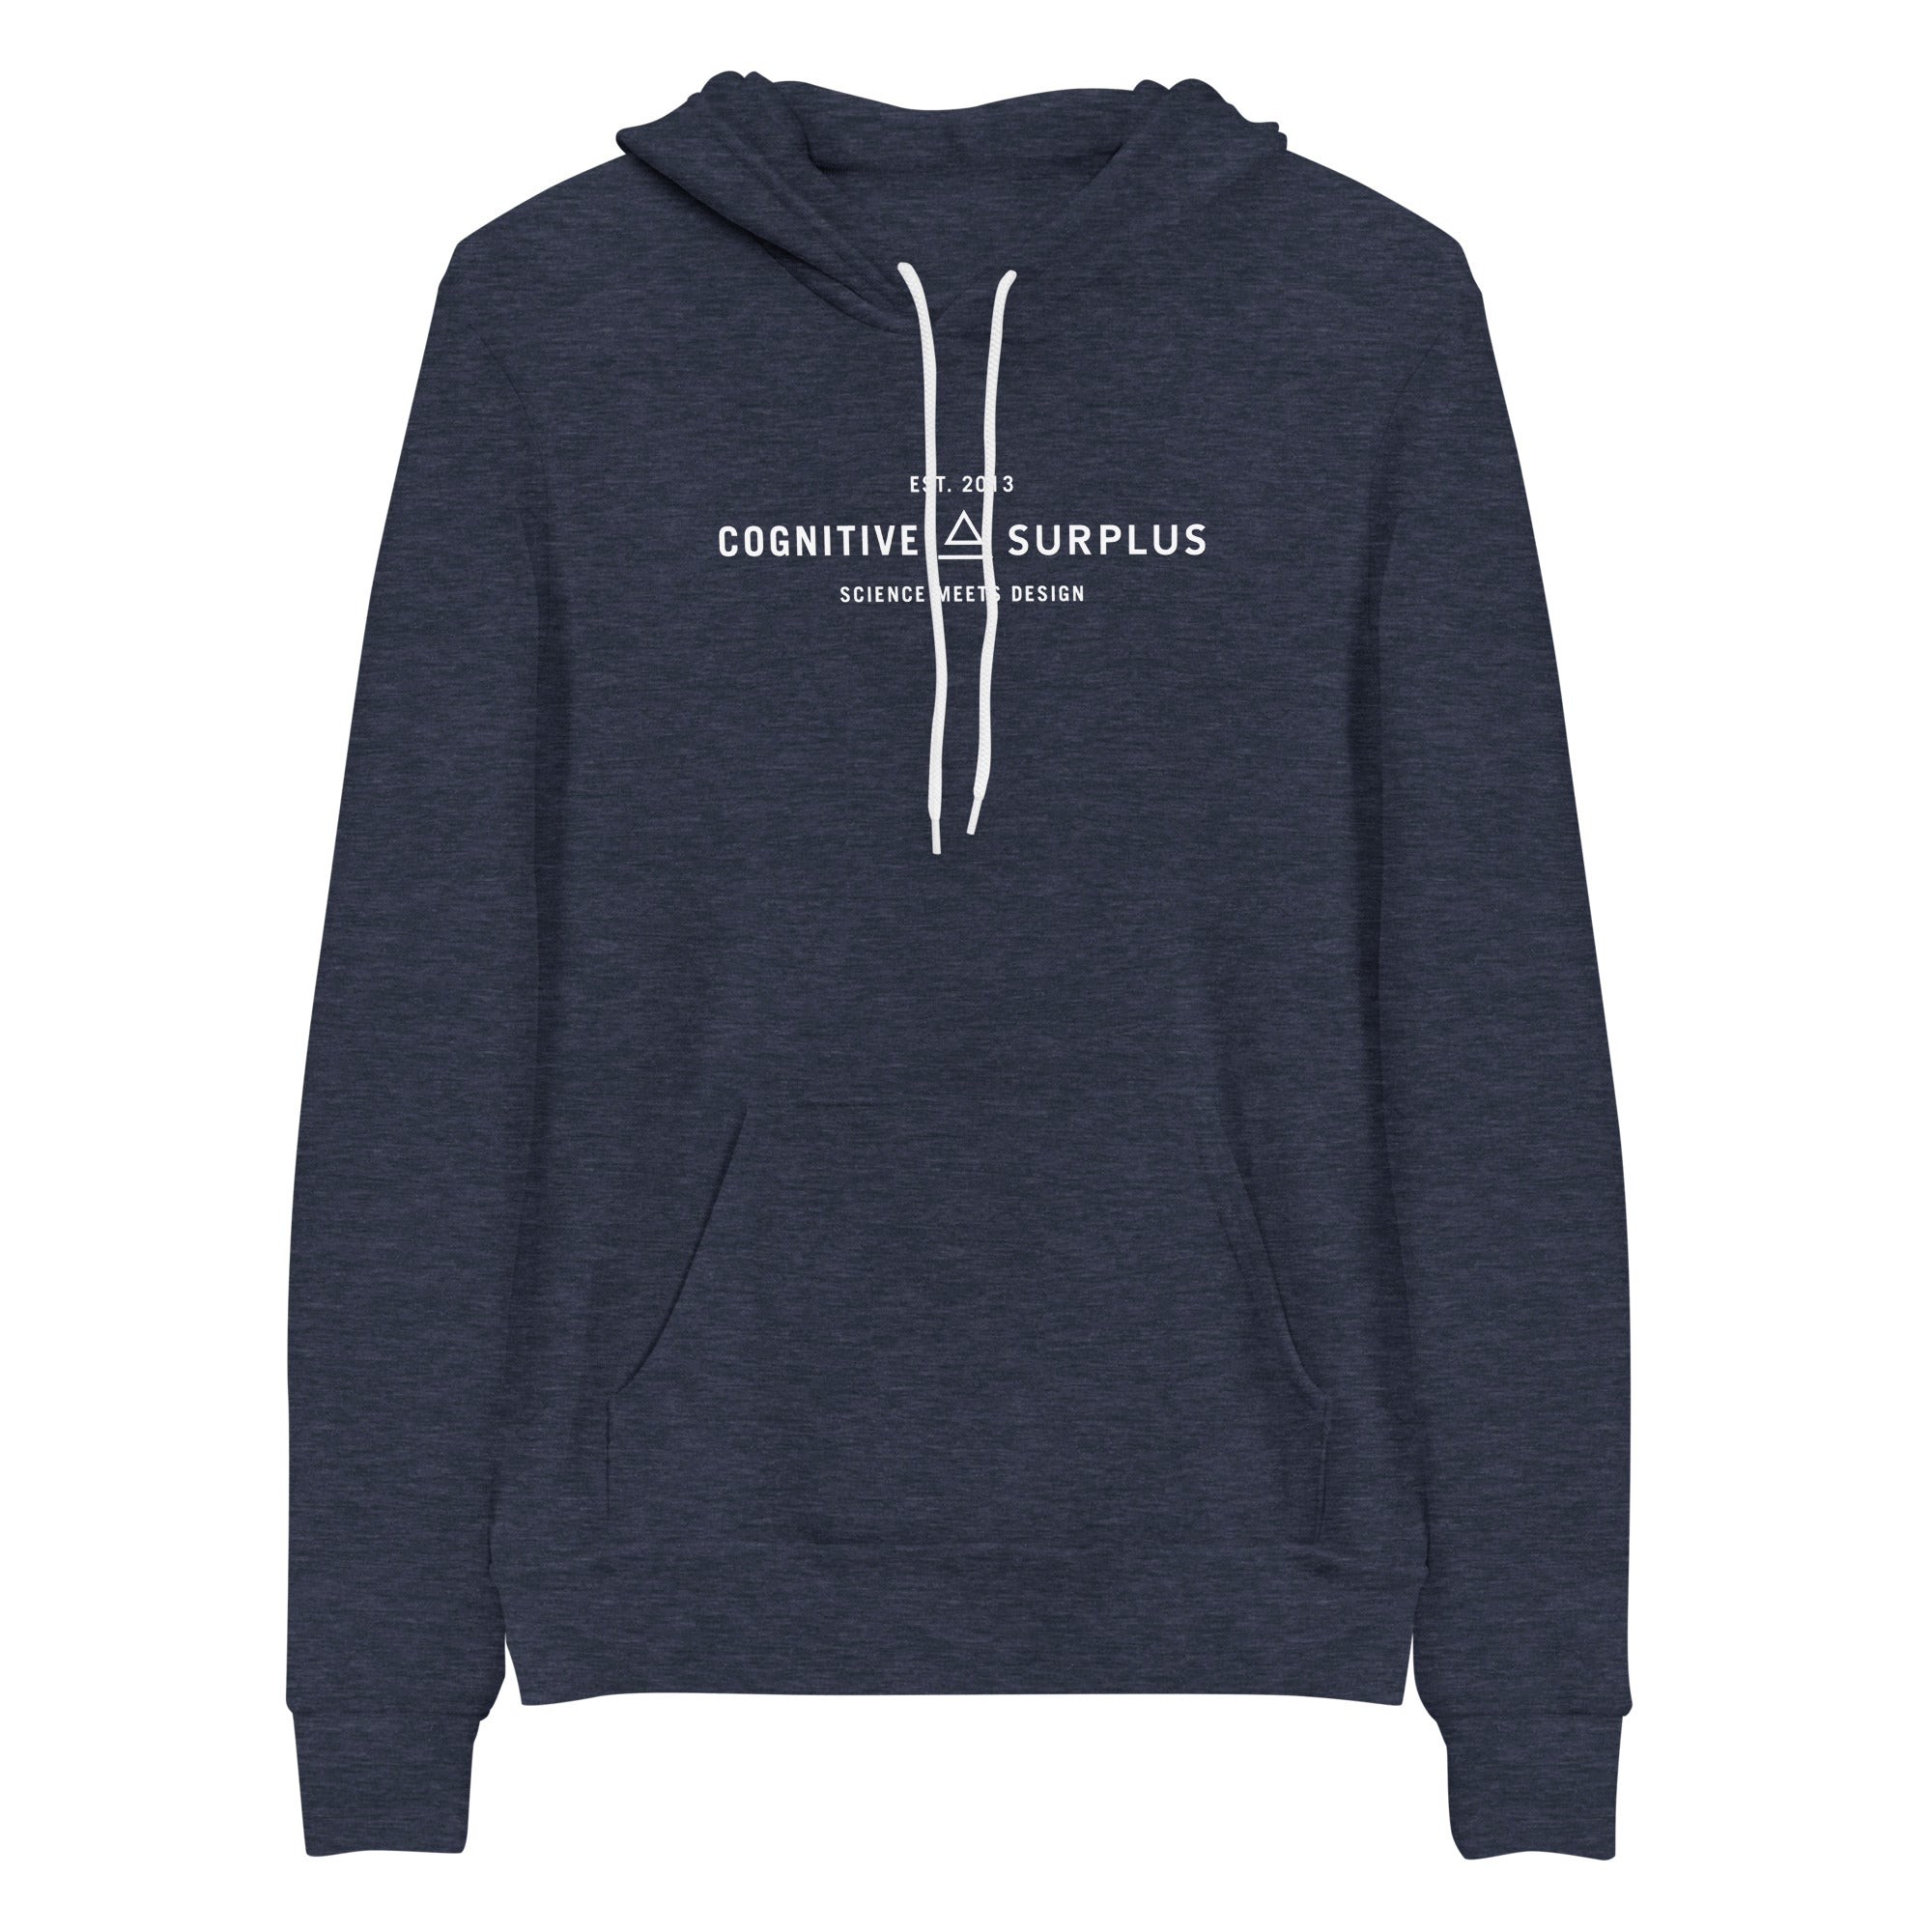 unisex-pullover-hoodie-heather-navy-front-654e60d3e4f81.jpg